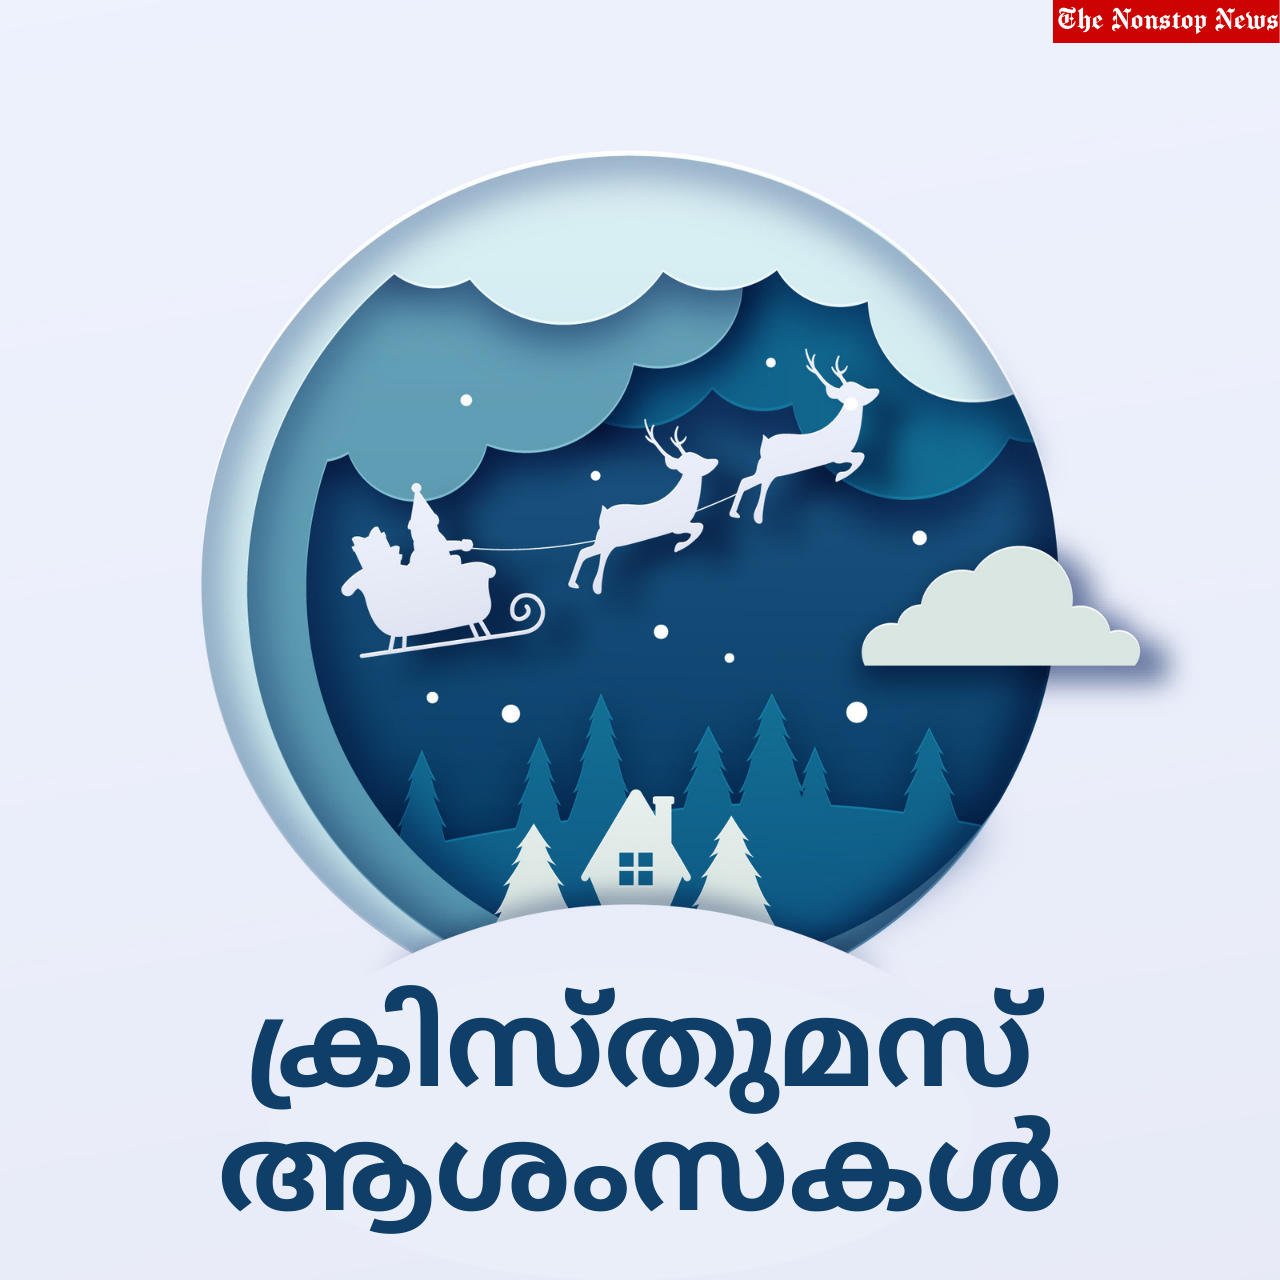 Happy Christmas 2021: Malayalam Wishes, Greetings, Messages, Quotes, Images, and Poster to share